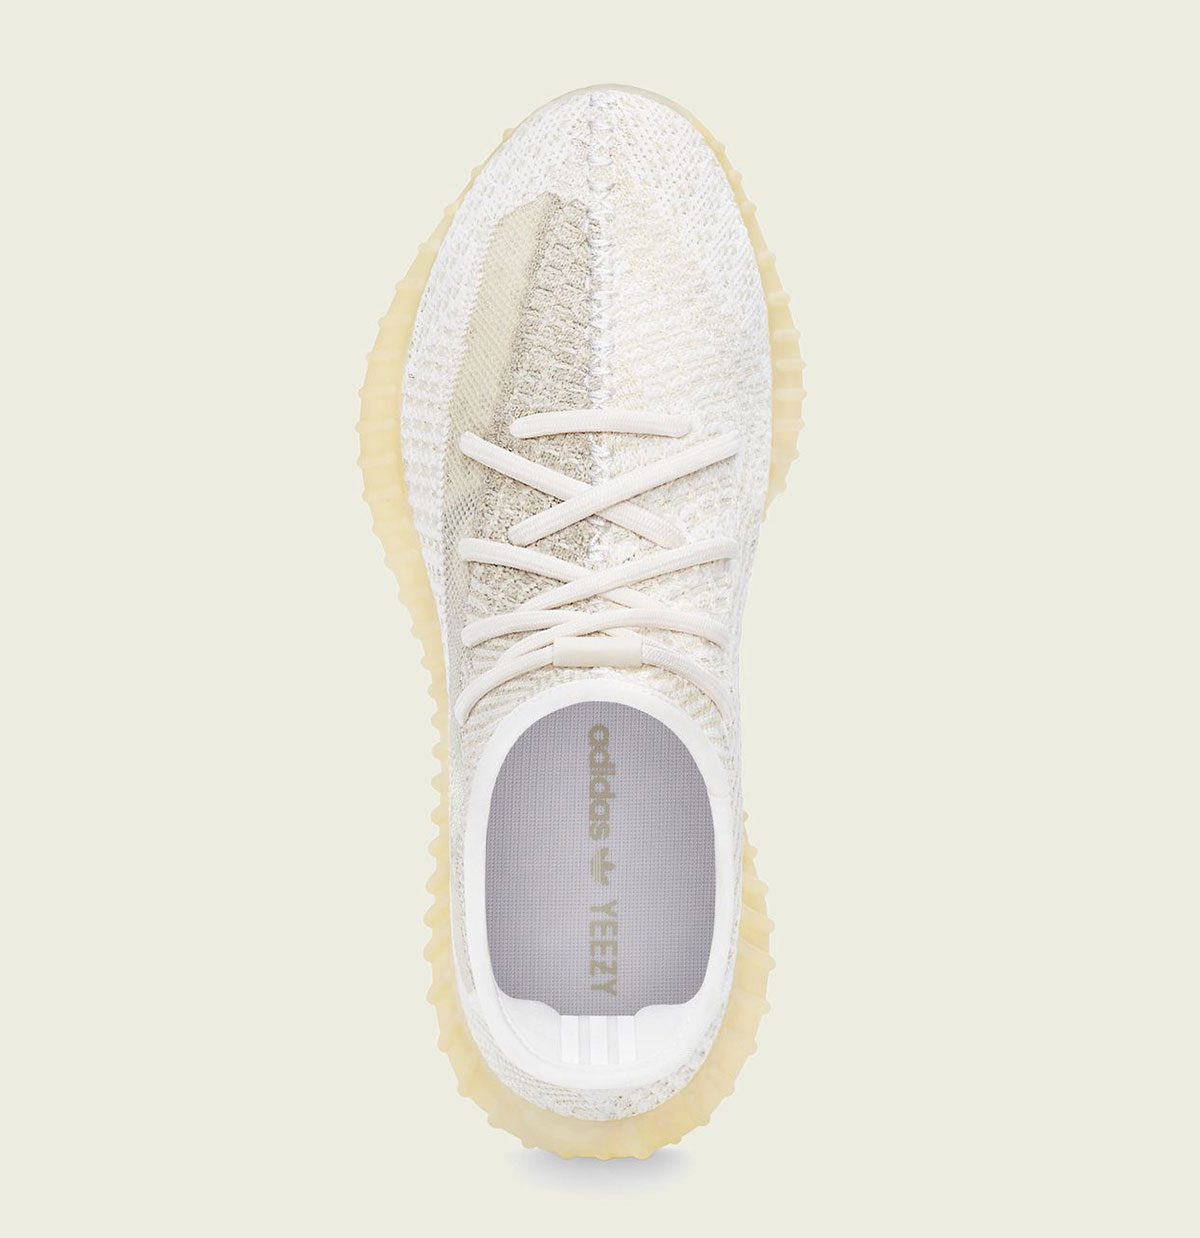 yeezy-boost-350-v2-natural-release-date-price-3